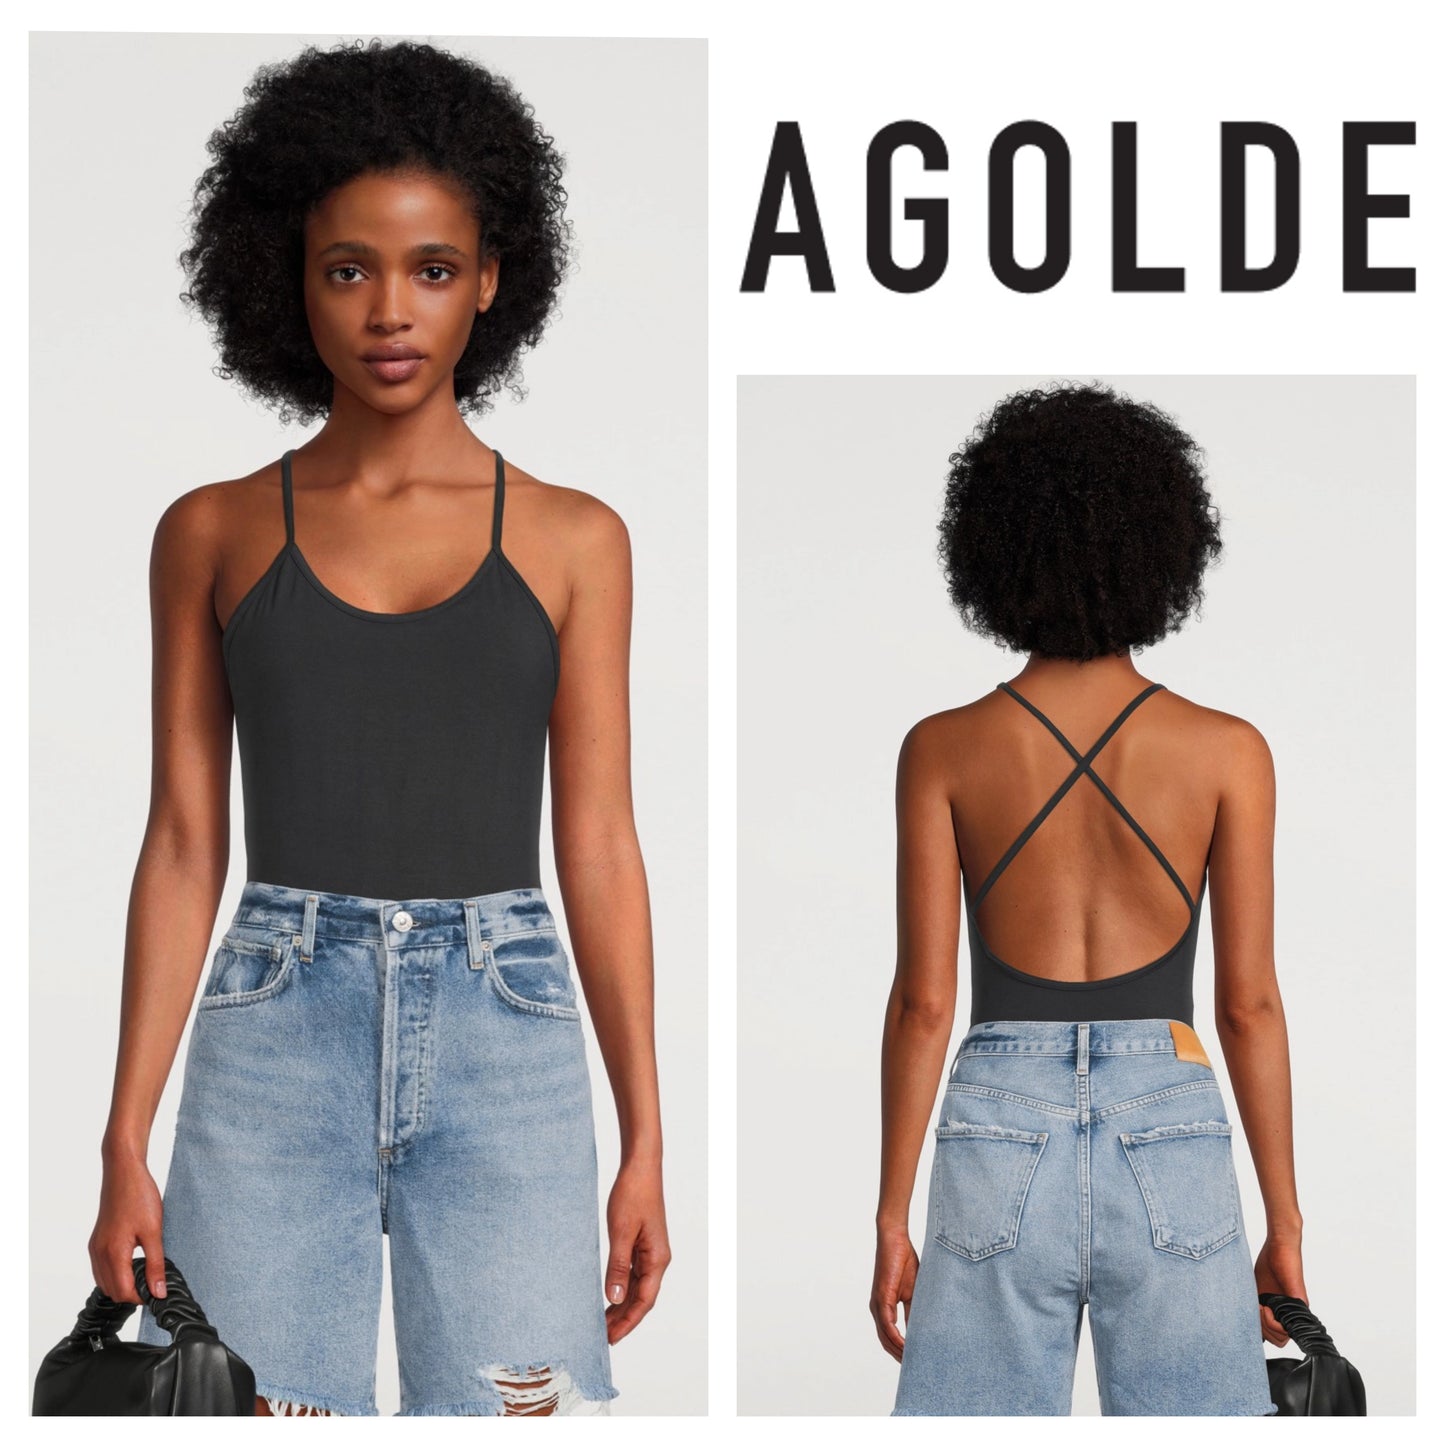 New without tags! AGOLDE Dhalia Cross Back Bodysuit sz Lrg.